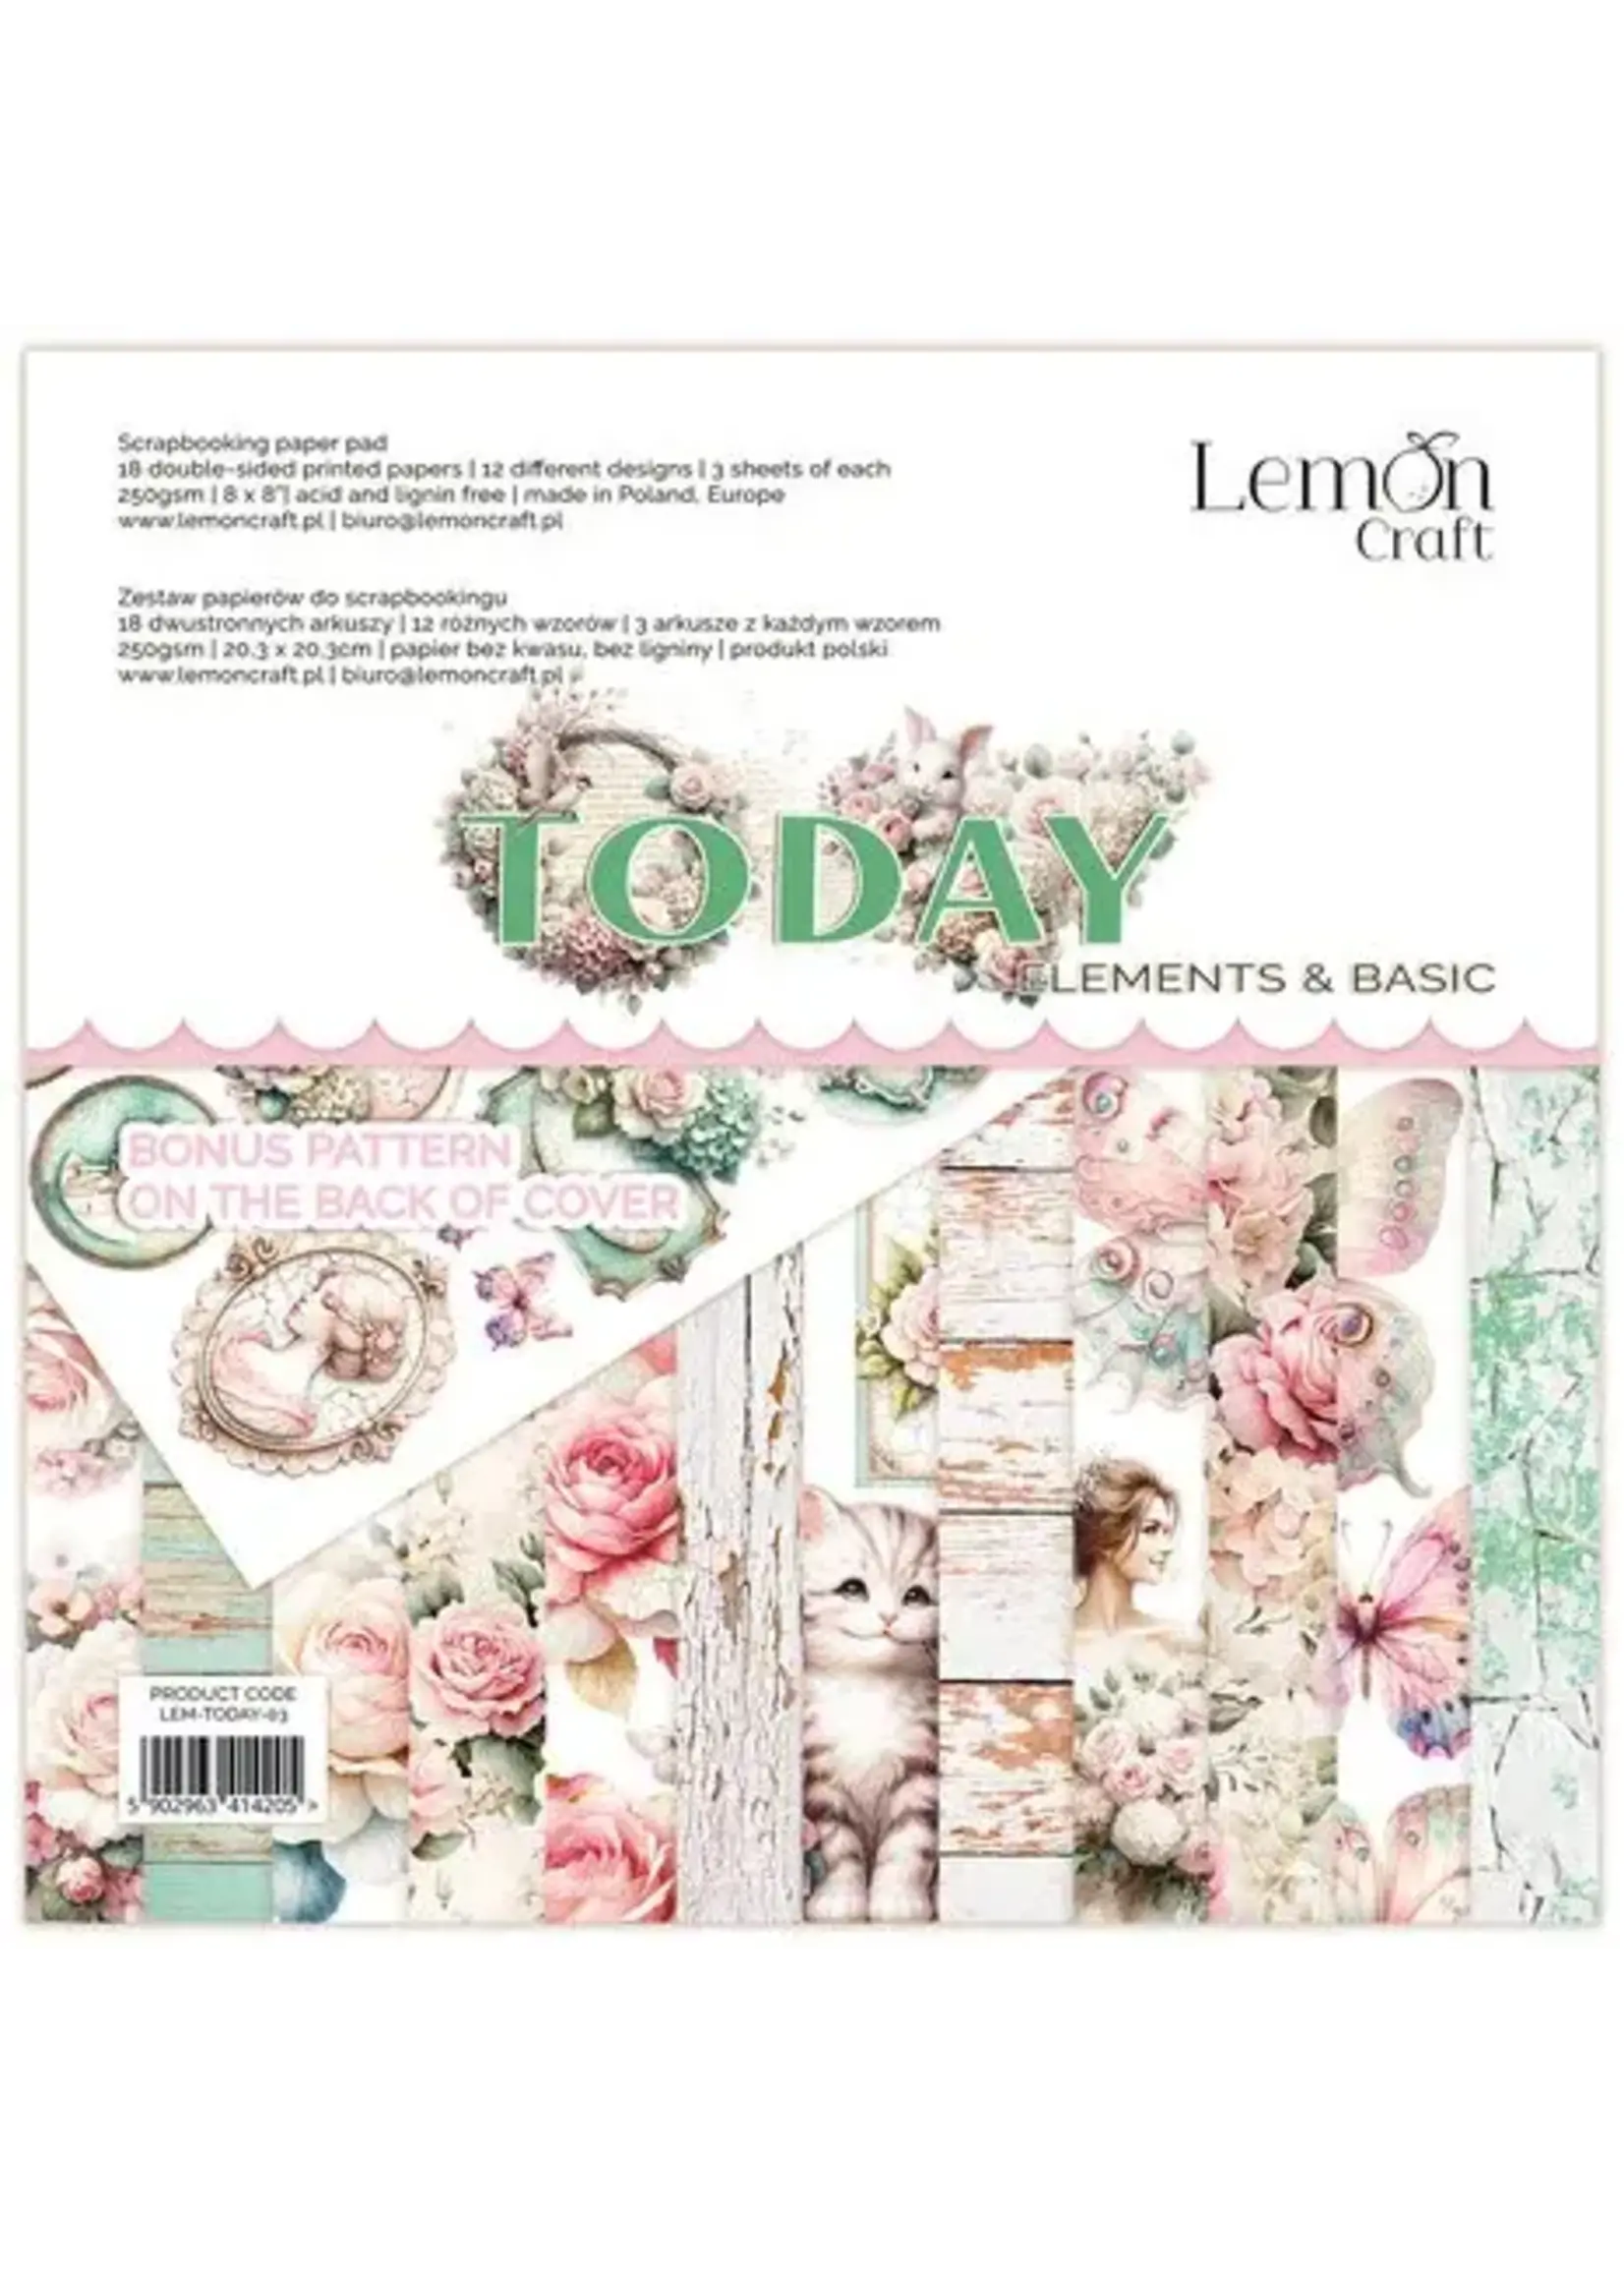 Today Elements & Basics 8x8 Inch Paper Pad (LEM-TODAY-03)